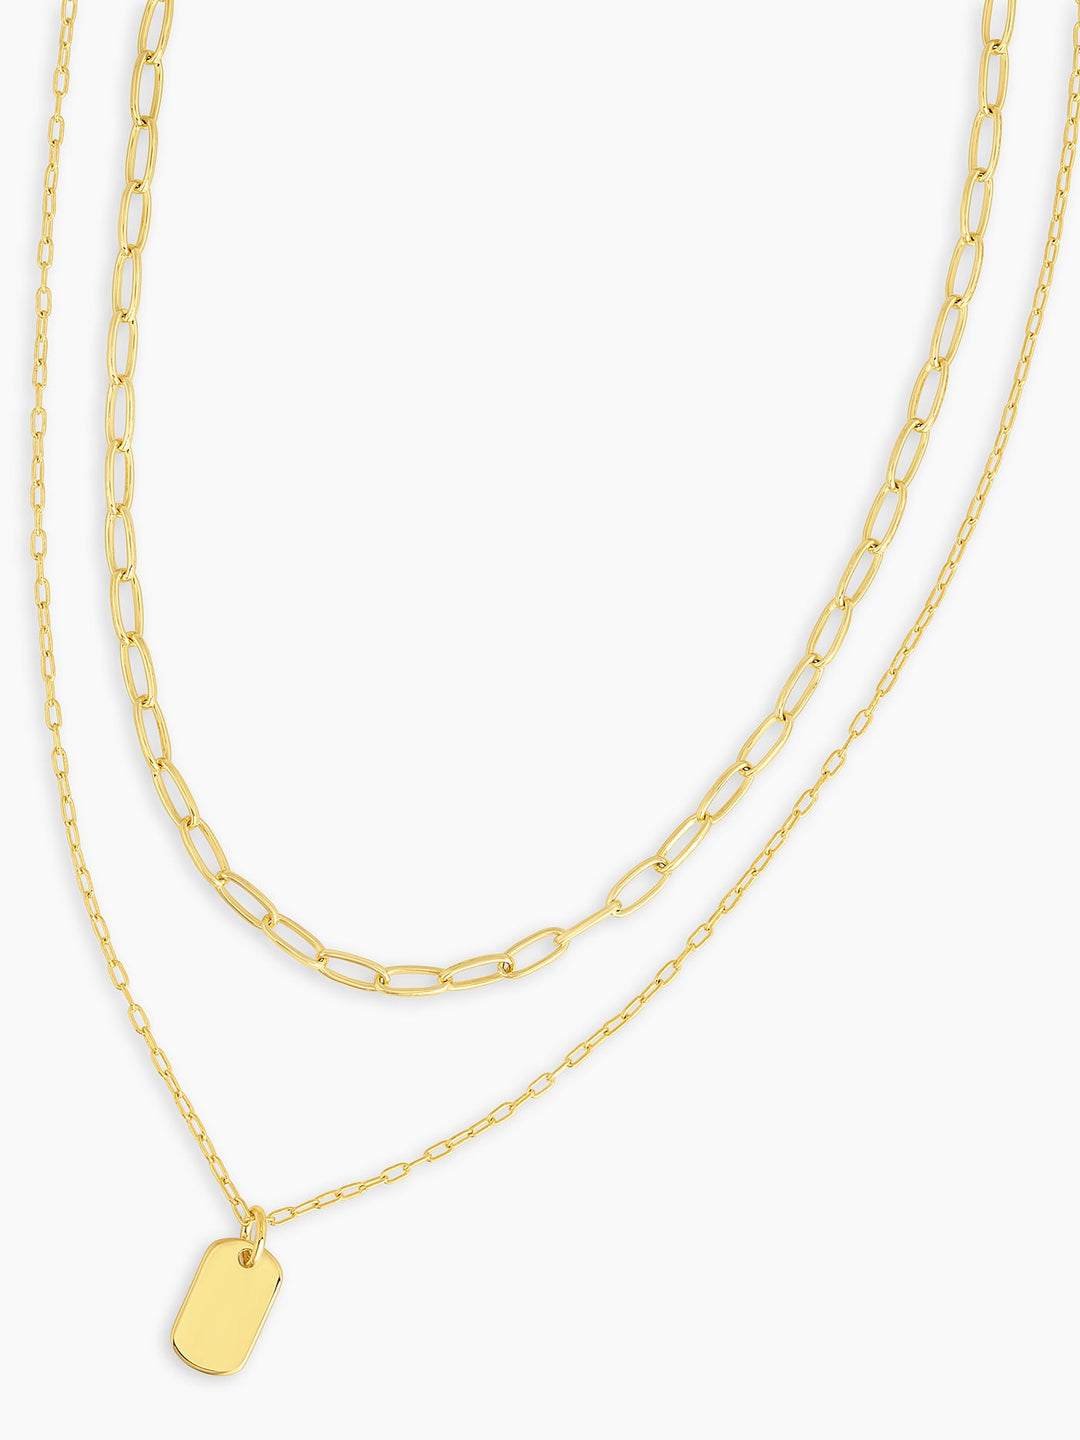 Tatum Necklace Layering Set in Gold Plated, Women's by Gorjana